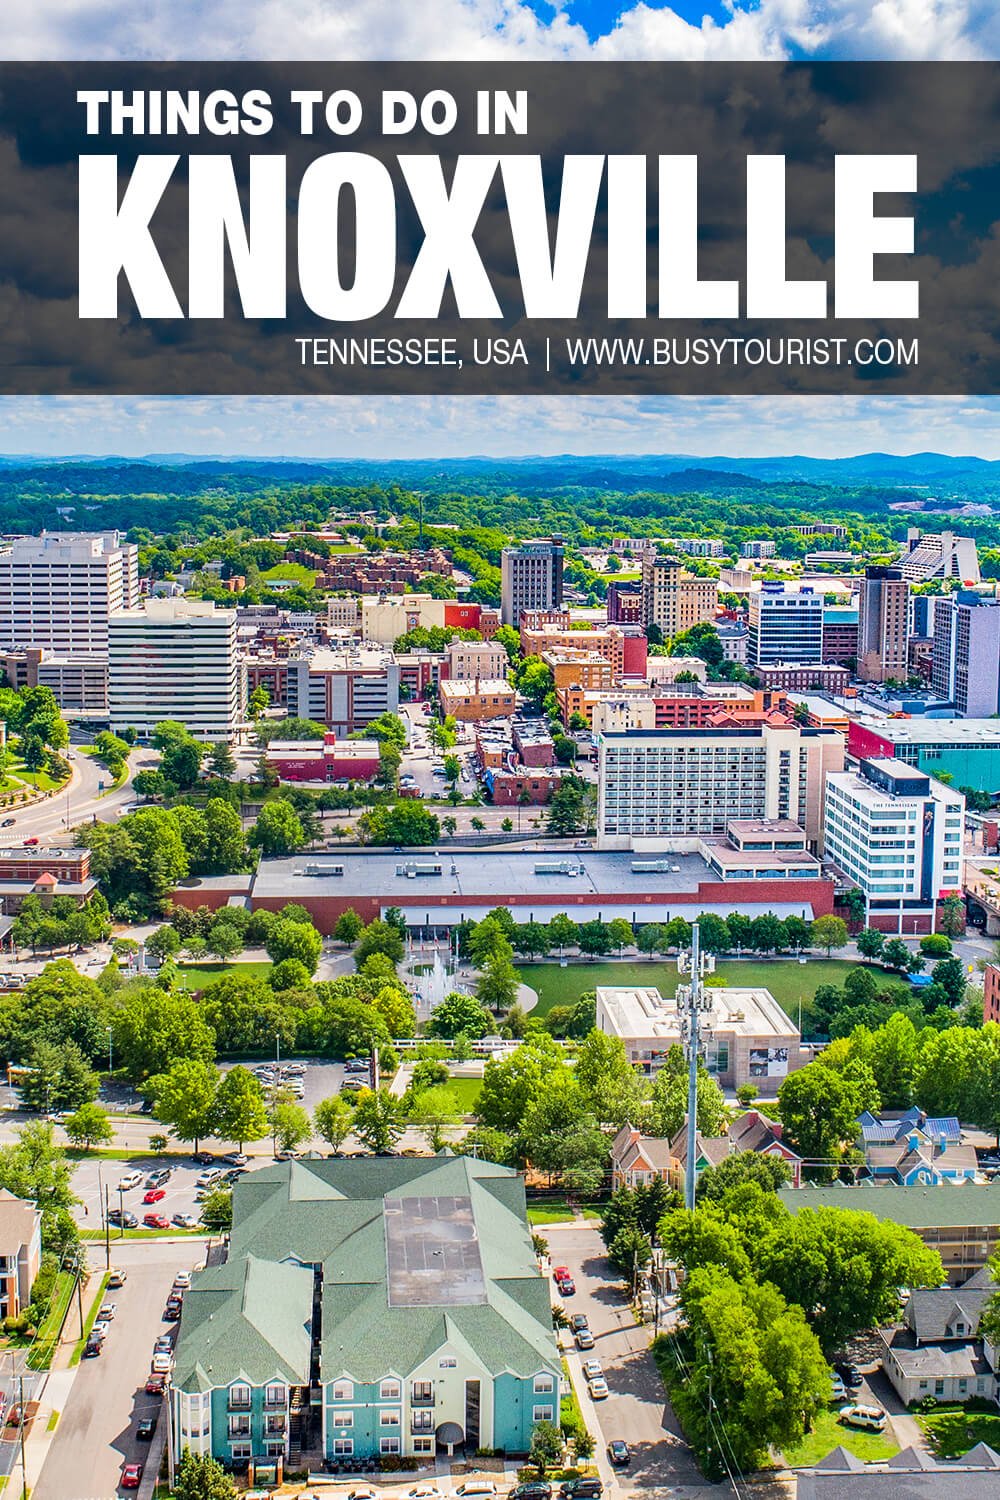 32 Best & Fun Things To Do In Knoxville (TN) - Attractions & Activities